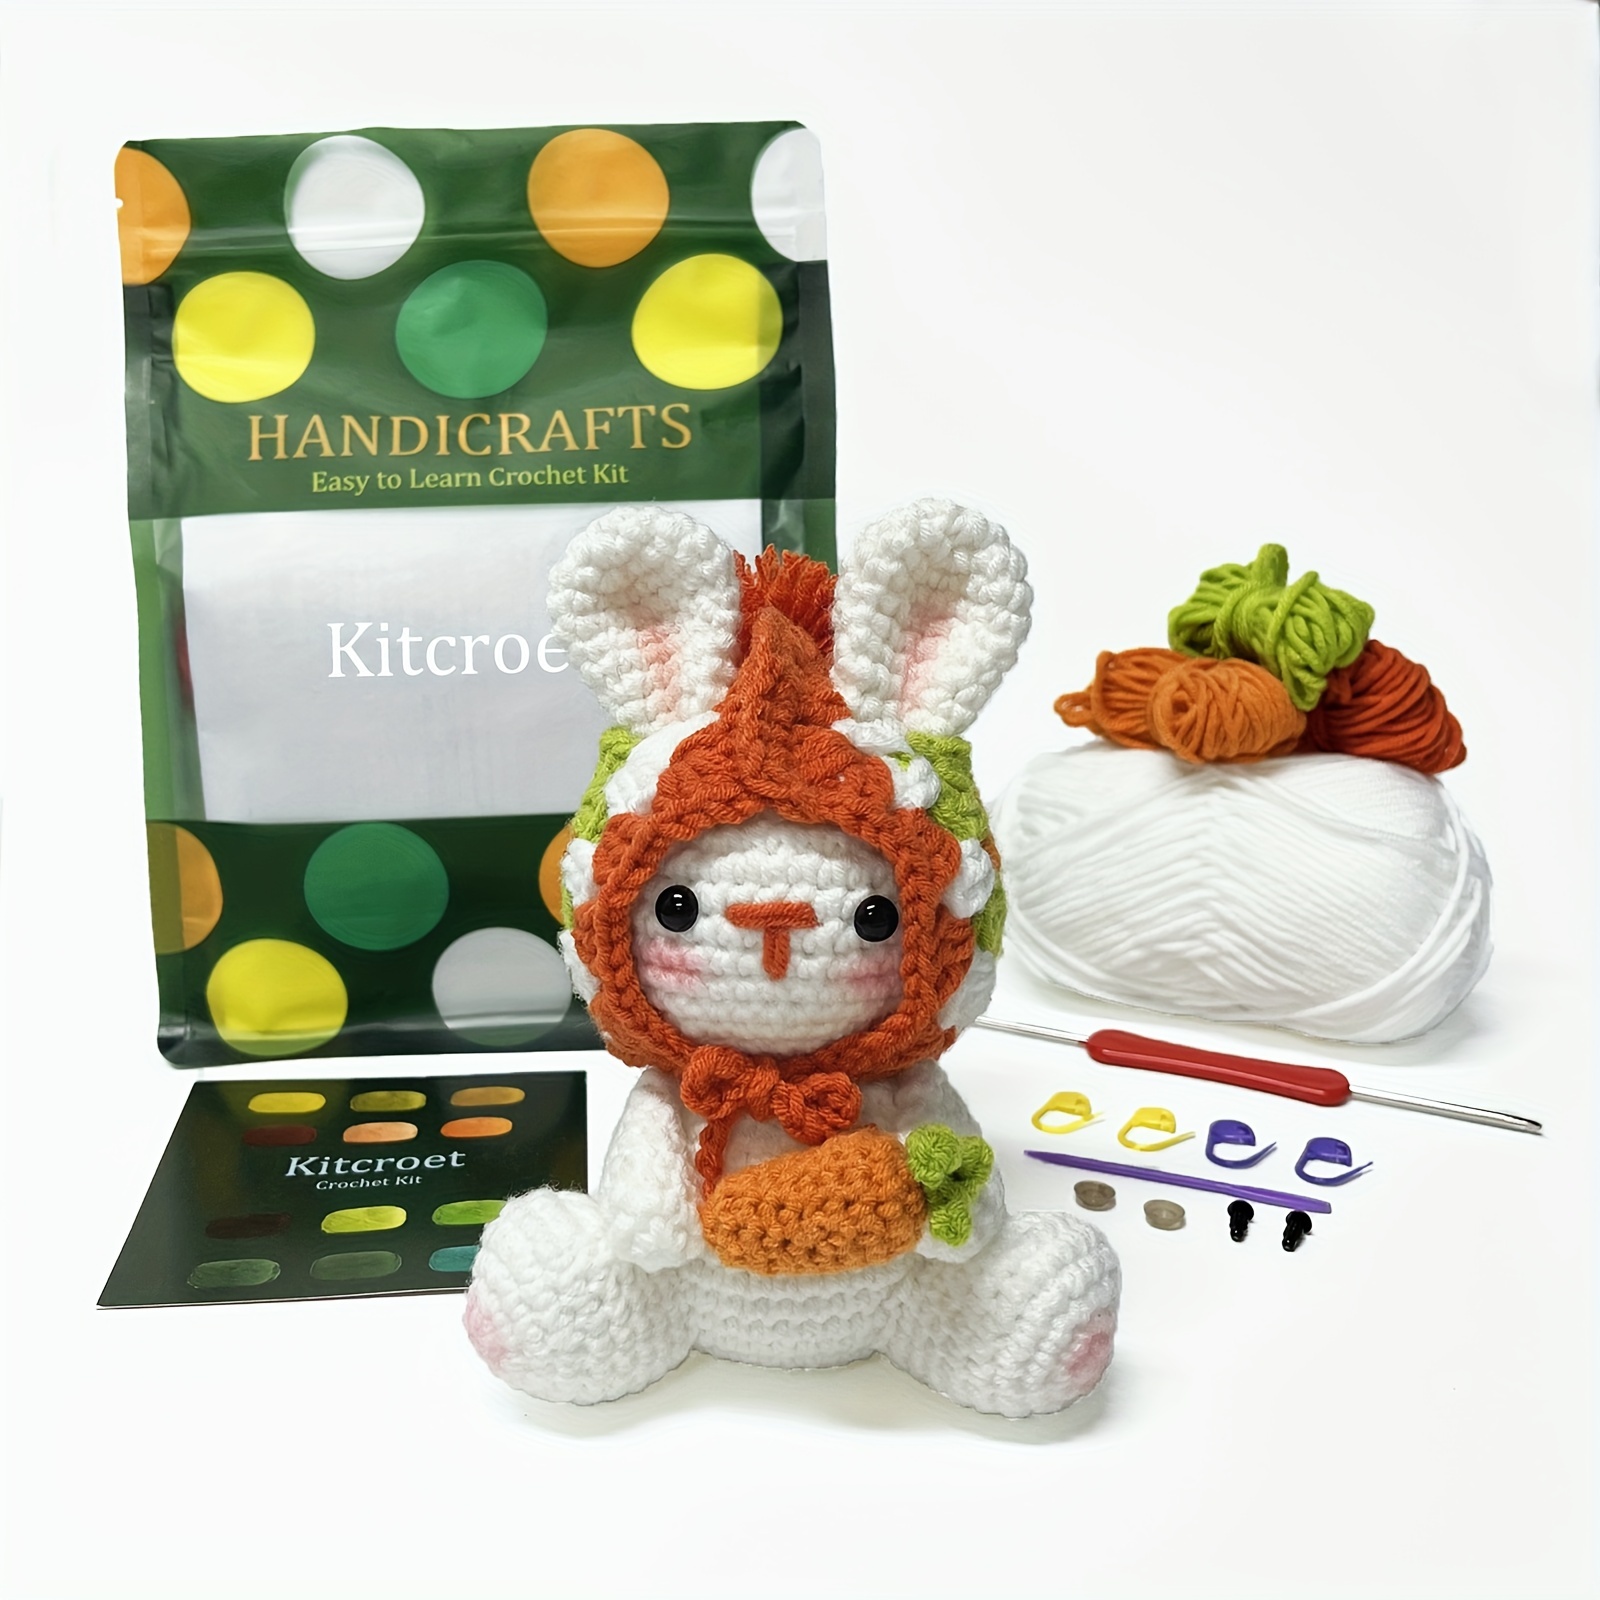 Beginners Crochet Kit With Easy Peasy Yarn - Colorful Dinosaur Dolls With  Step-by-step Video Tutorials,crochet Kit For Beginners Animals,suitable For  Stress Relief, Decoration, Knitting Learning, Gifts, Etc